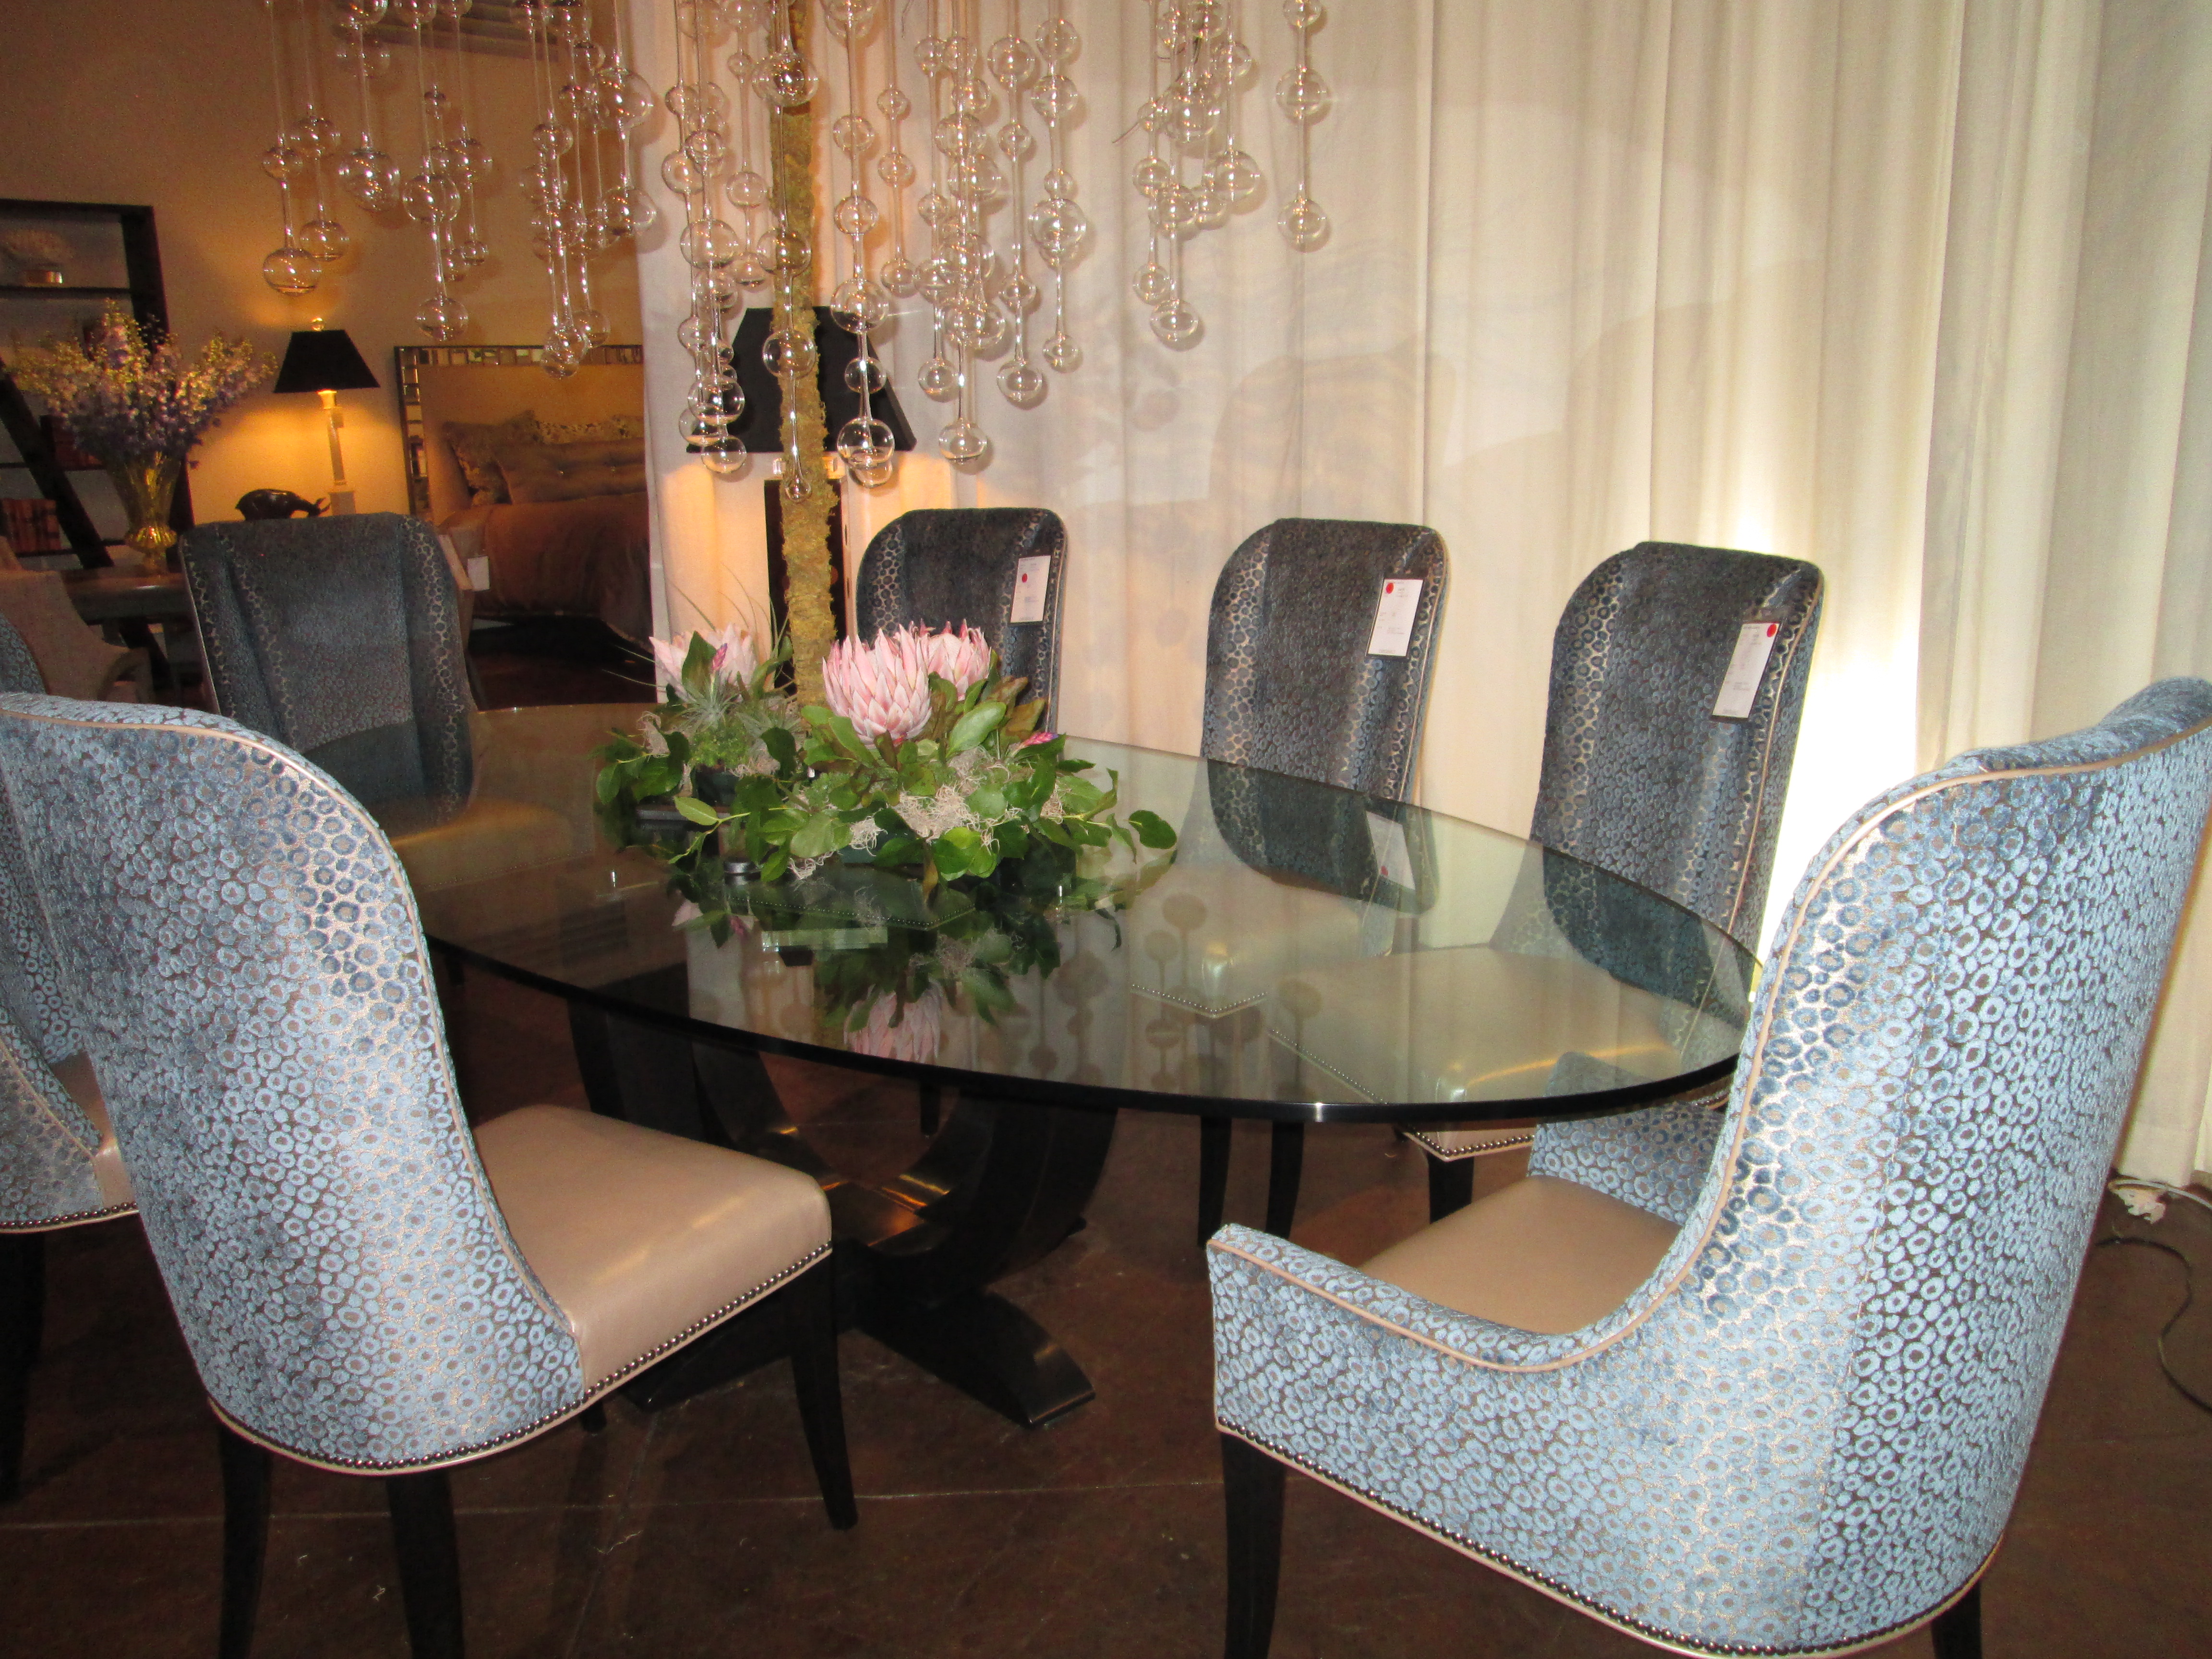 Swaim dining table and chairs